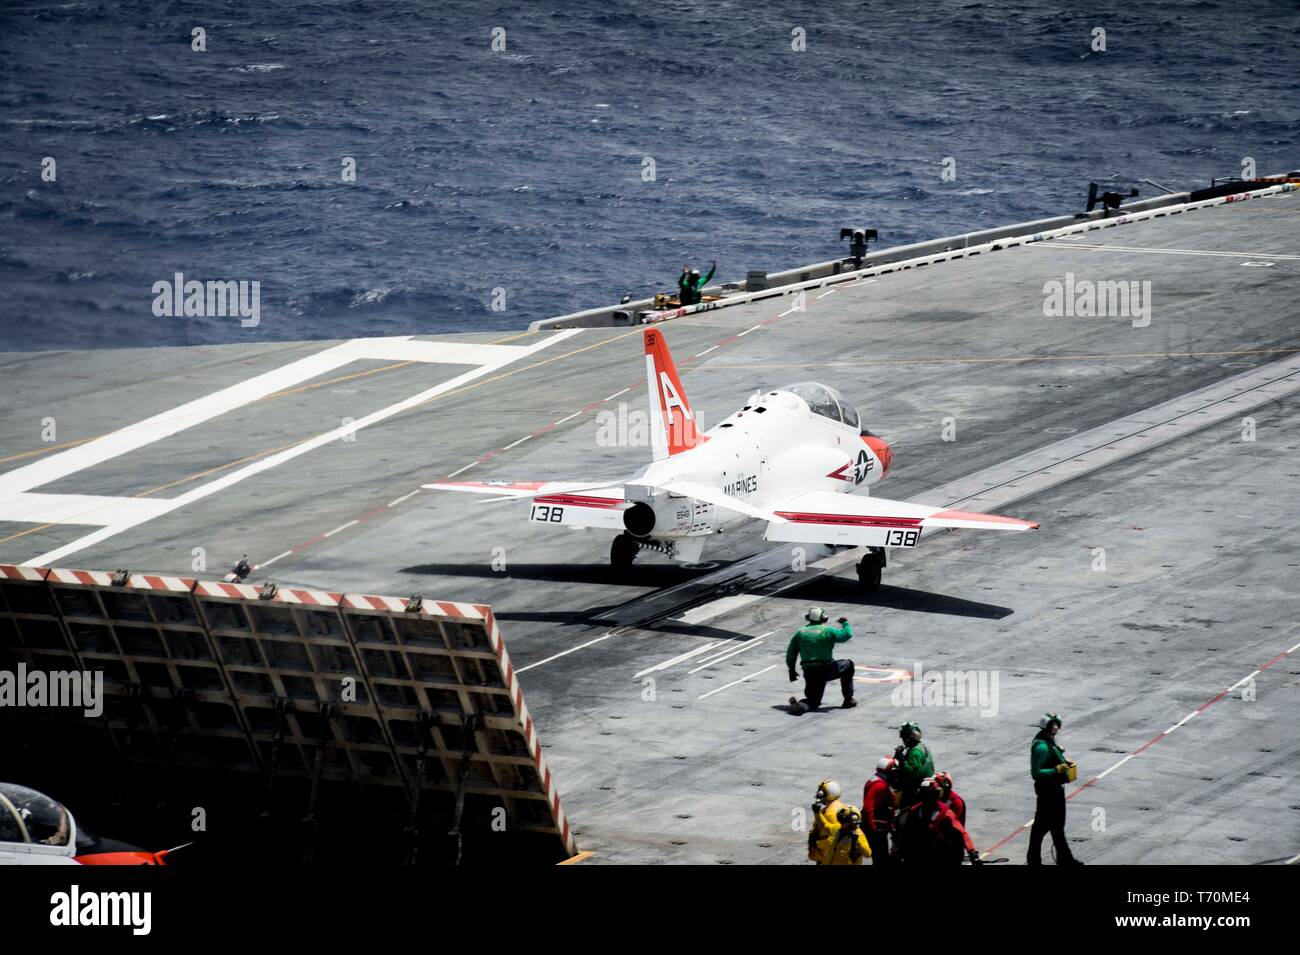 190502-N-KT825-0207  ATLANTIC OCEAN (May 2, 2019) A T-45C Goshawk training aircraft assigned to Training Air Wing (TW) 2 launches from the flight deck aboard the aircraft carrier USS Dwight D. Eisenhower (CVN 69). Ike is underway in the Atlantic Ocean conducting carrier qualifications while in the basic phase of the Optimized Fleet Response Plan. (U.S. Navy photo by Mass Communication Specialist Seaman Sawyer Haskins) Stock Photo